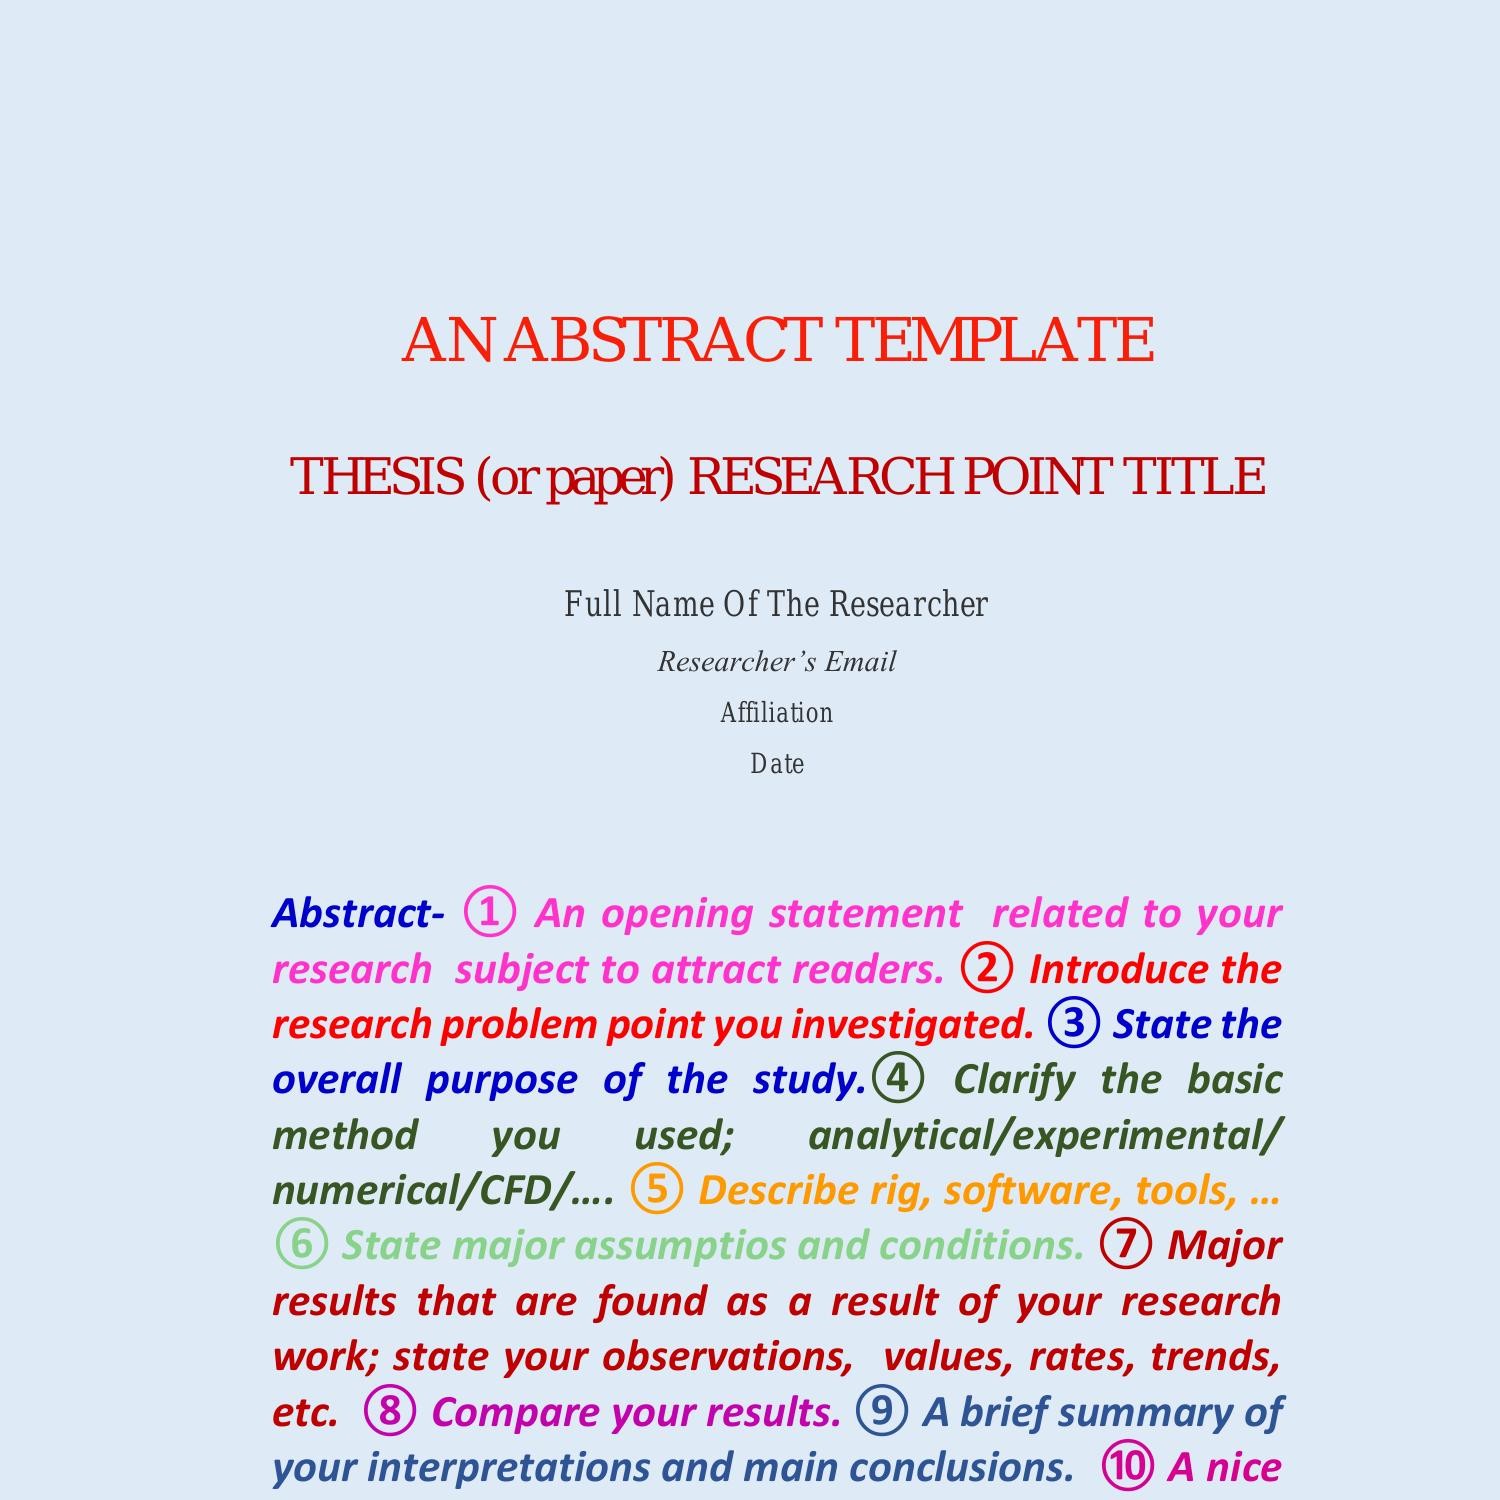 ABSTRACTTEMPLATE.pdf DocDroid